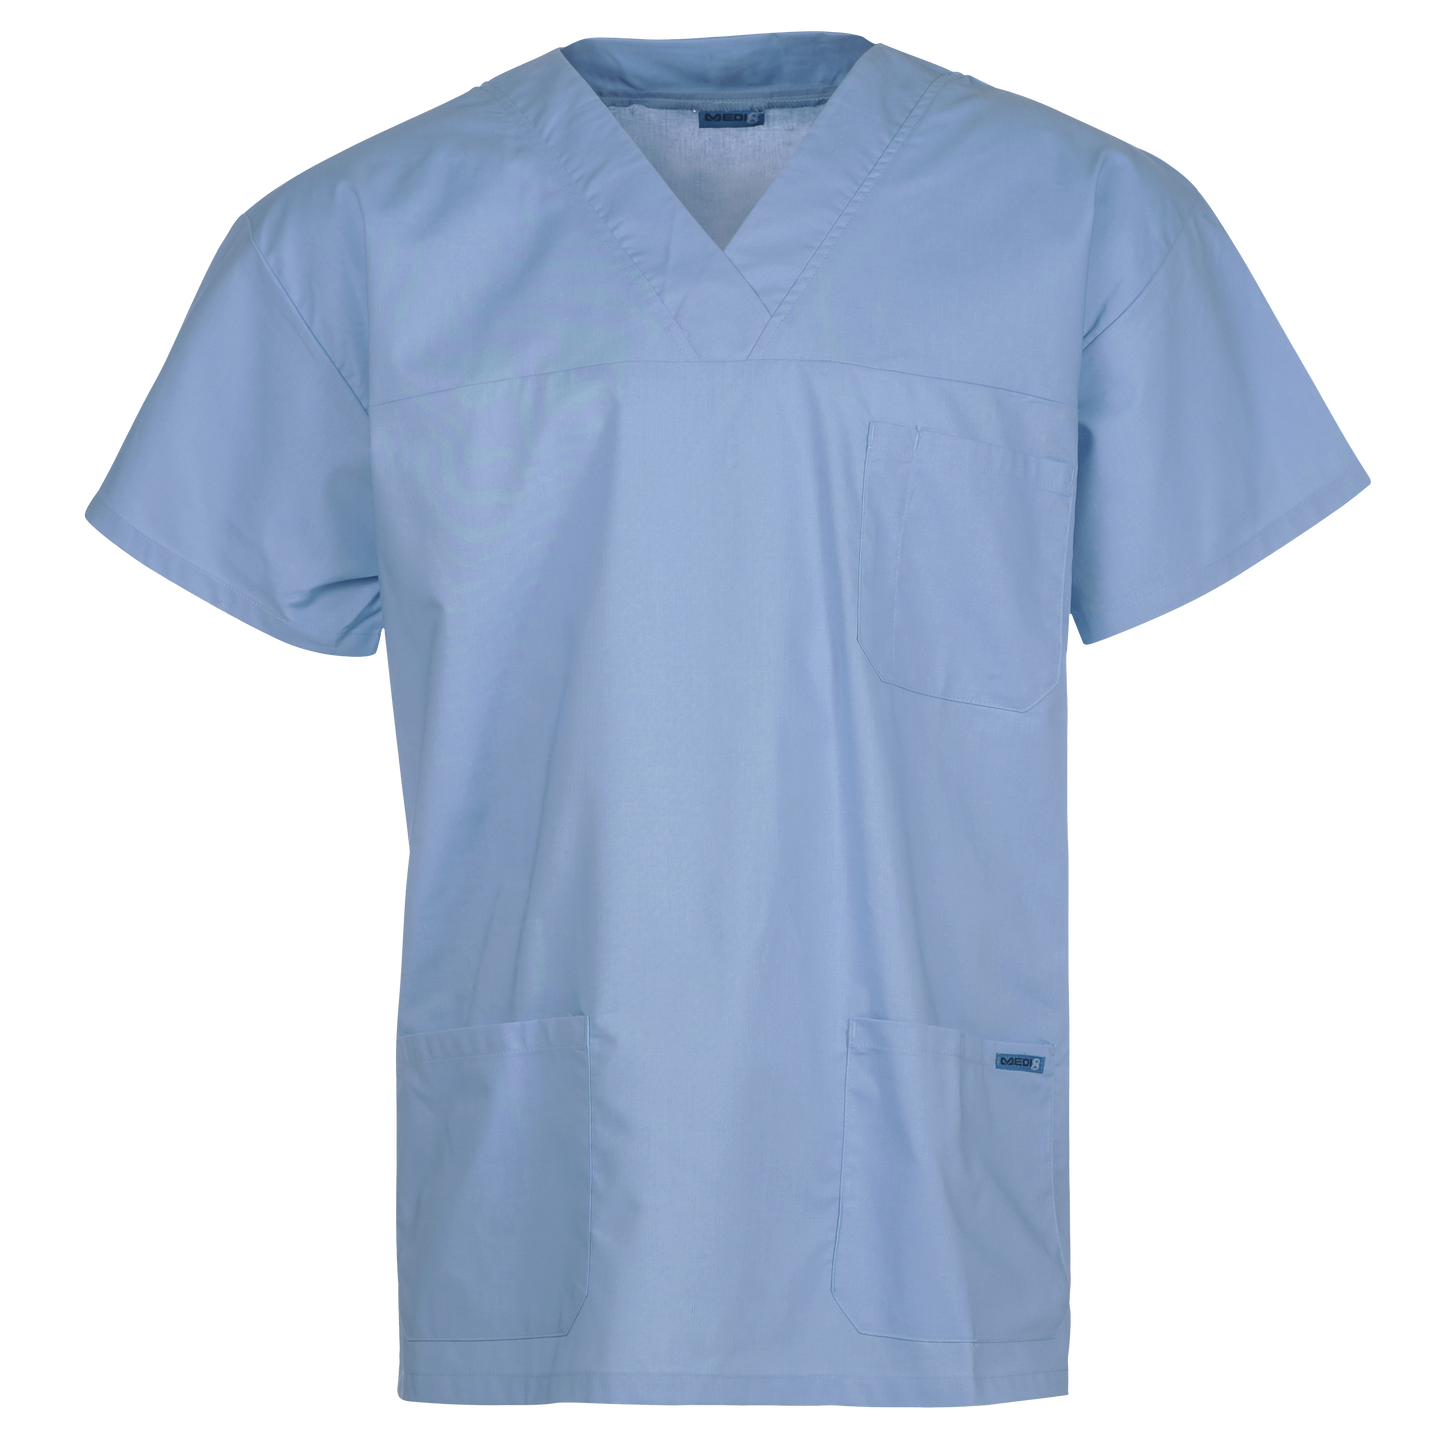 Unisex Scrub Top With Pockets - made by Medi8